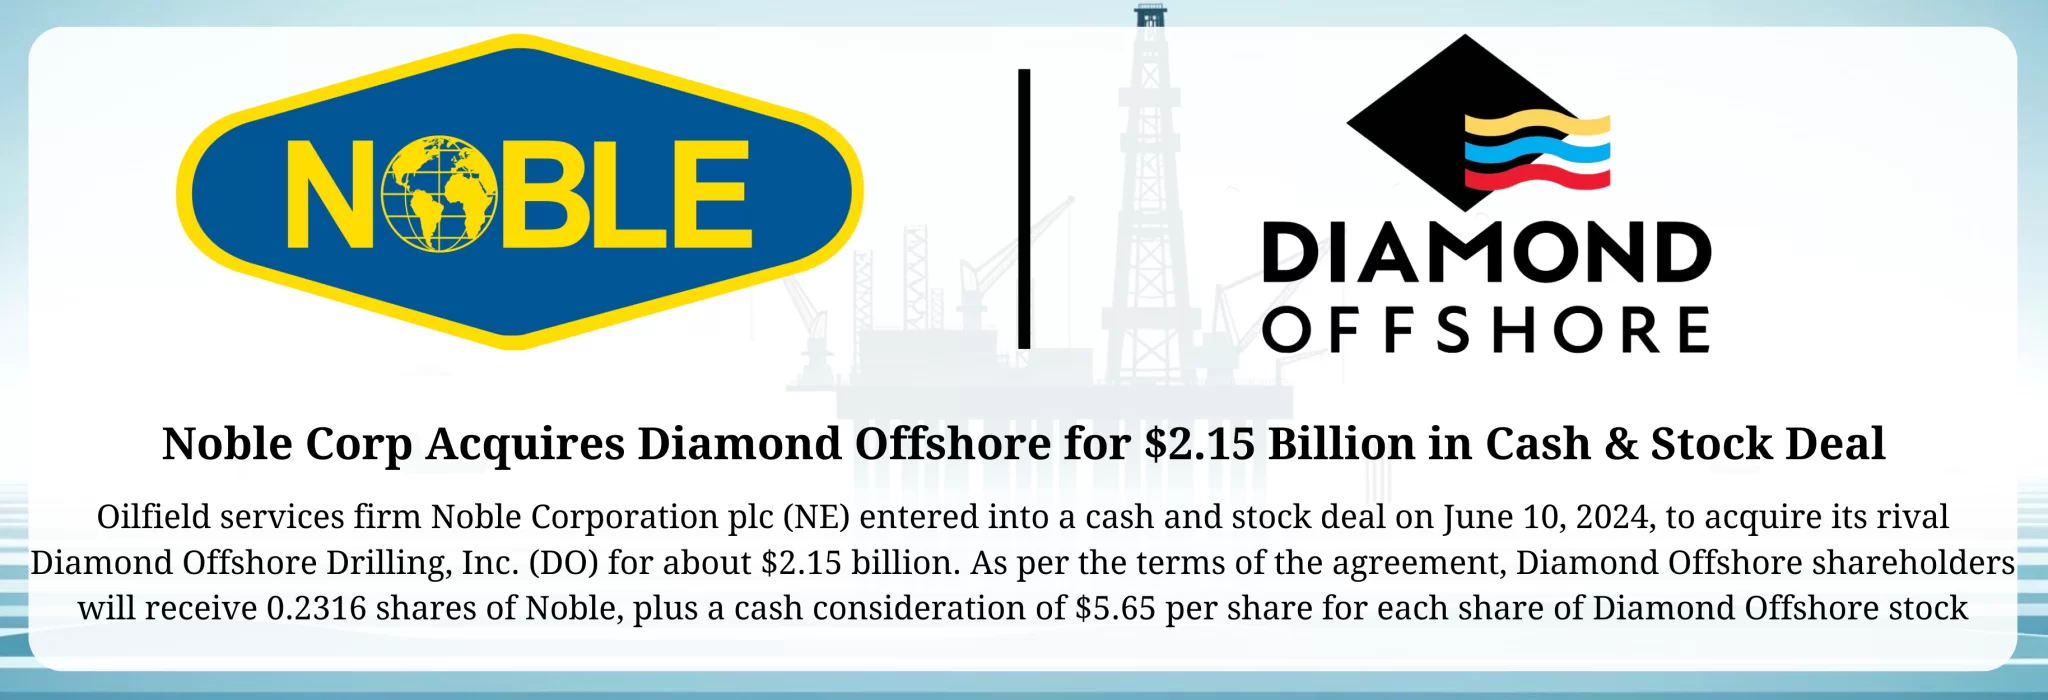 Noble Corporation Announces Agreement to Acquire Diamond Offshore Drilling, Inc. for $2.15 Billion in Cash & Stock Deal